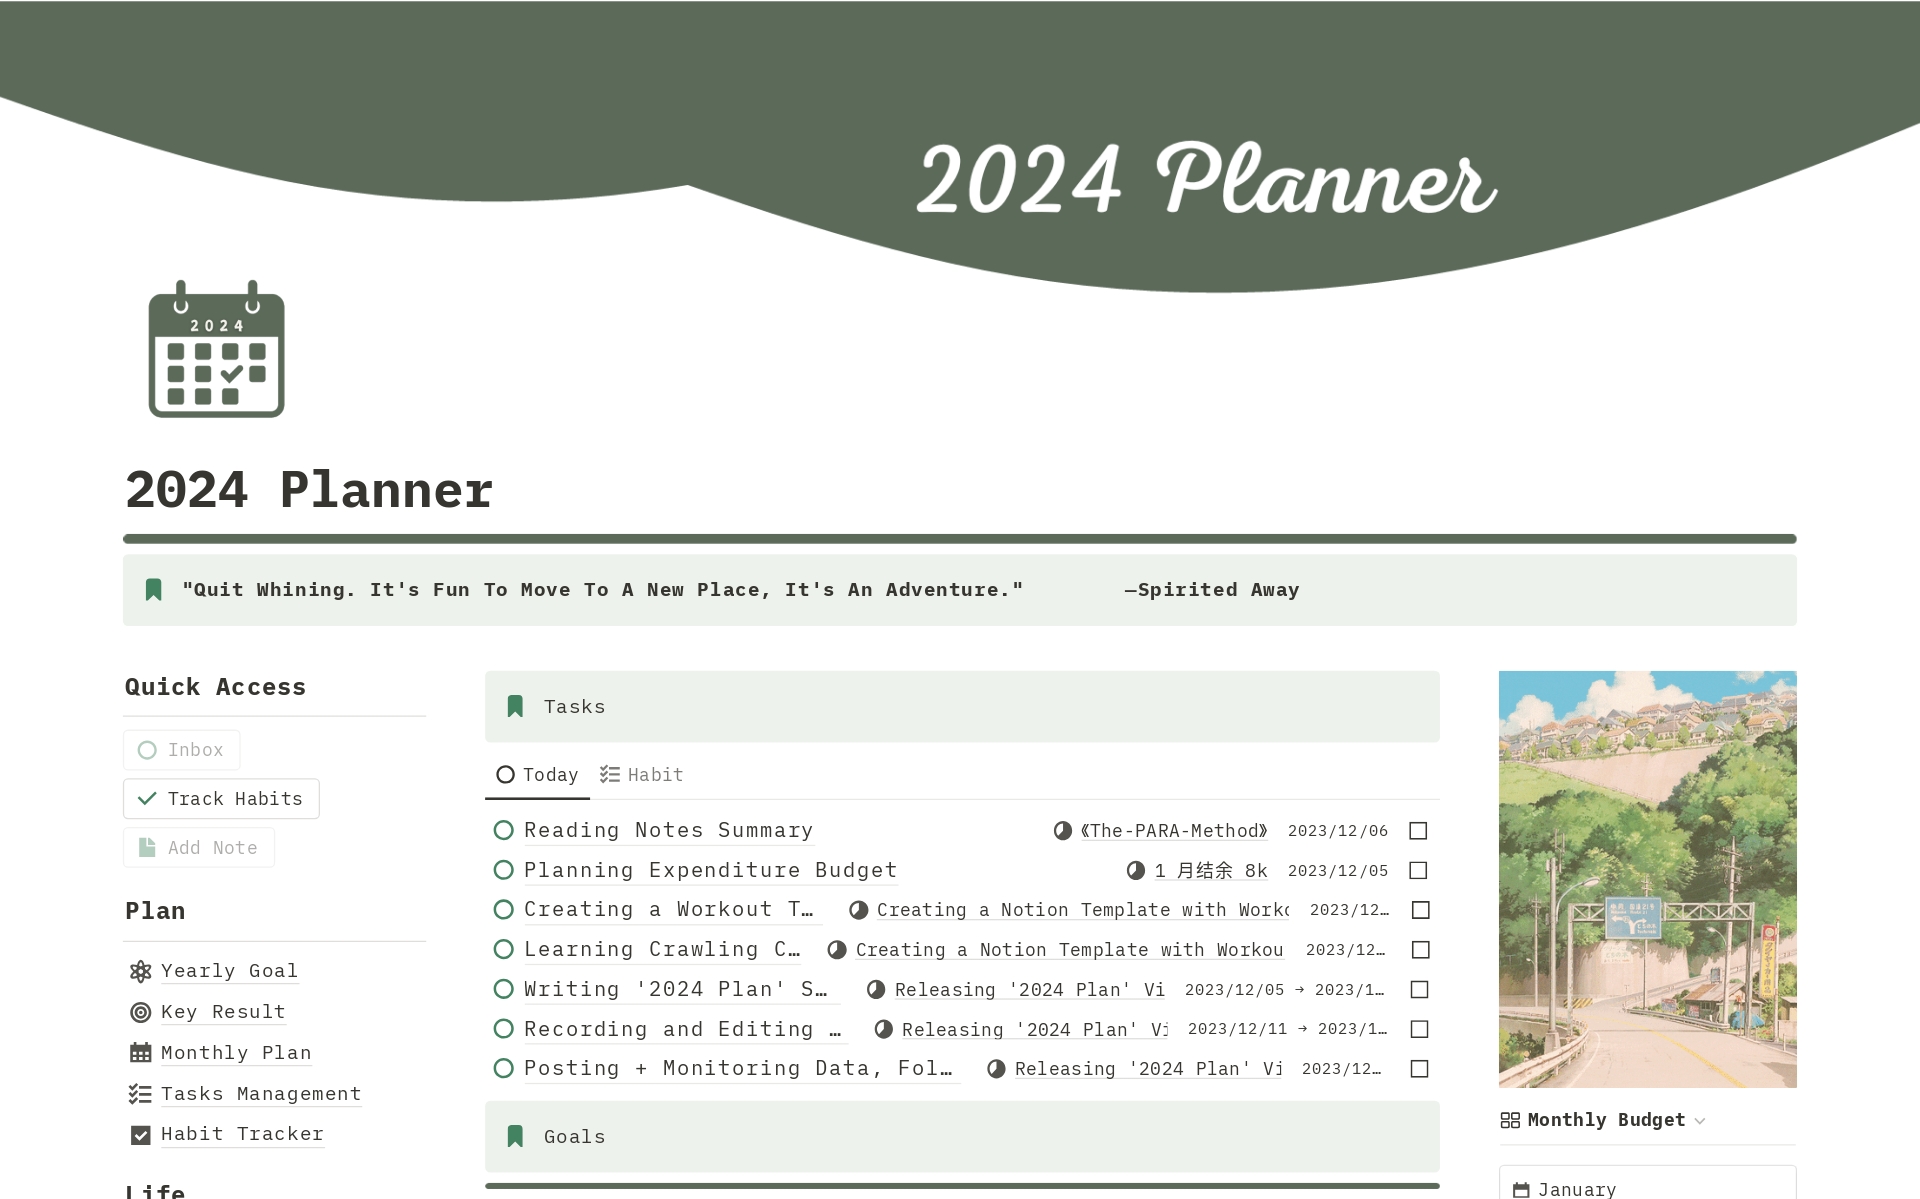 A template preview for 2024 Planner